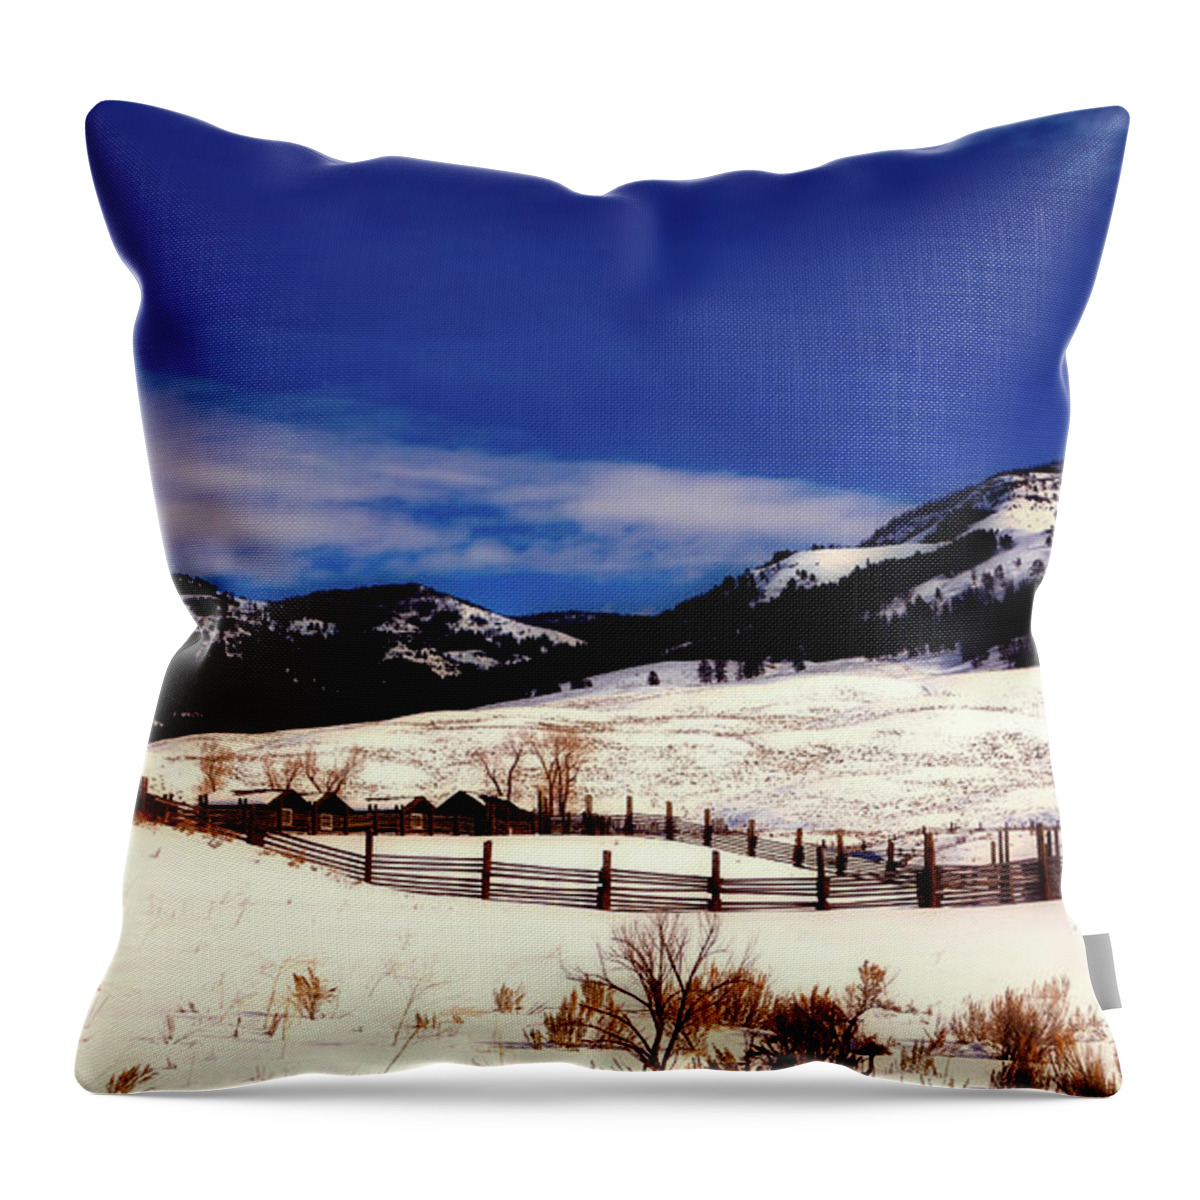 Yellowstone Throw Pillow featuring the photograph Lamar Ranger Station In Winter - Yellowstone by Mountain Dreams